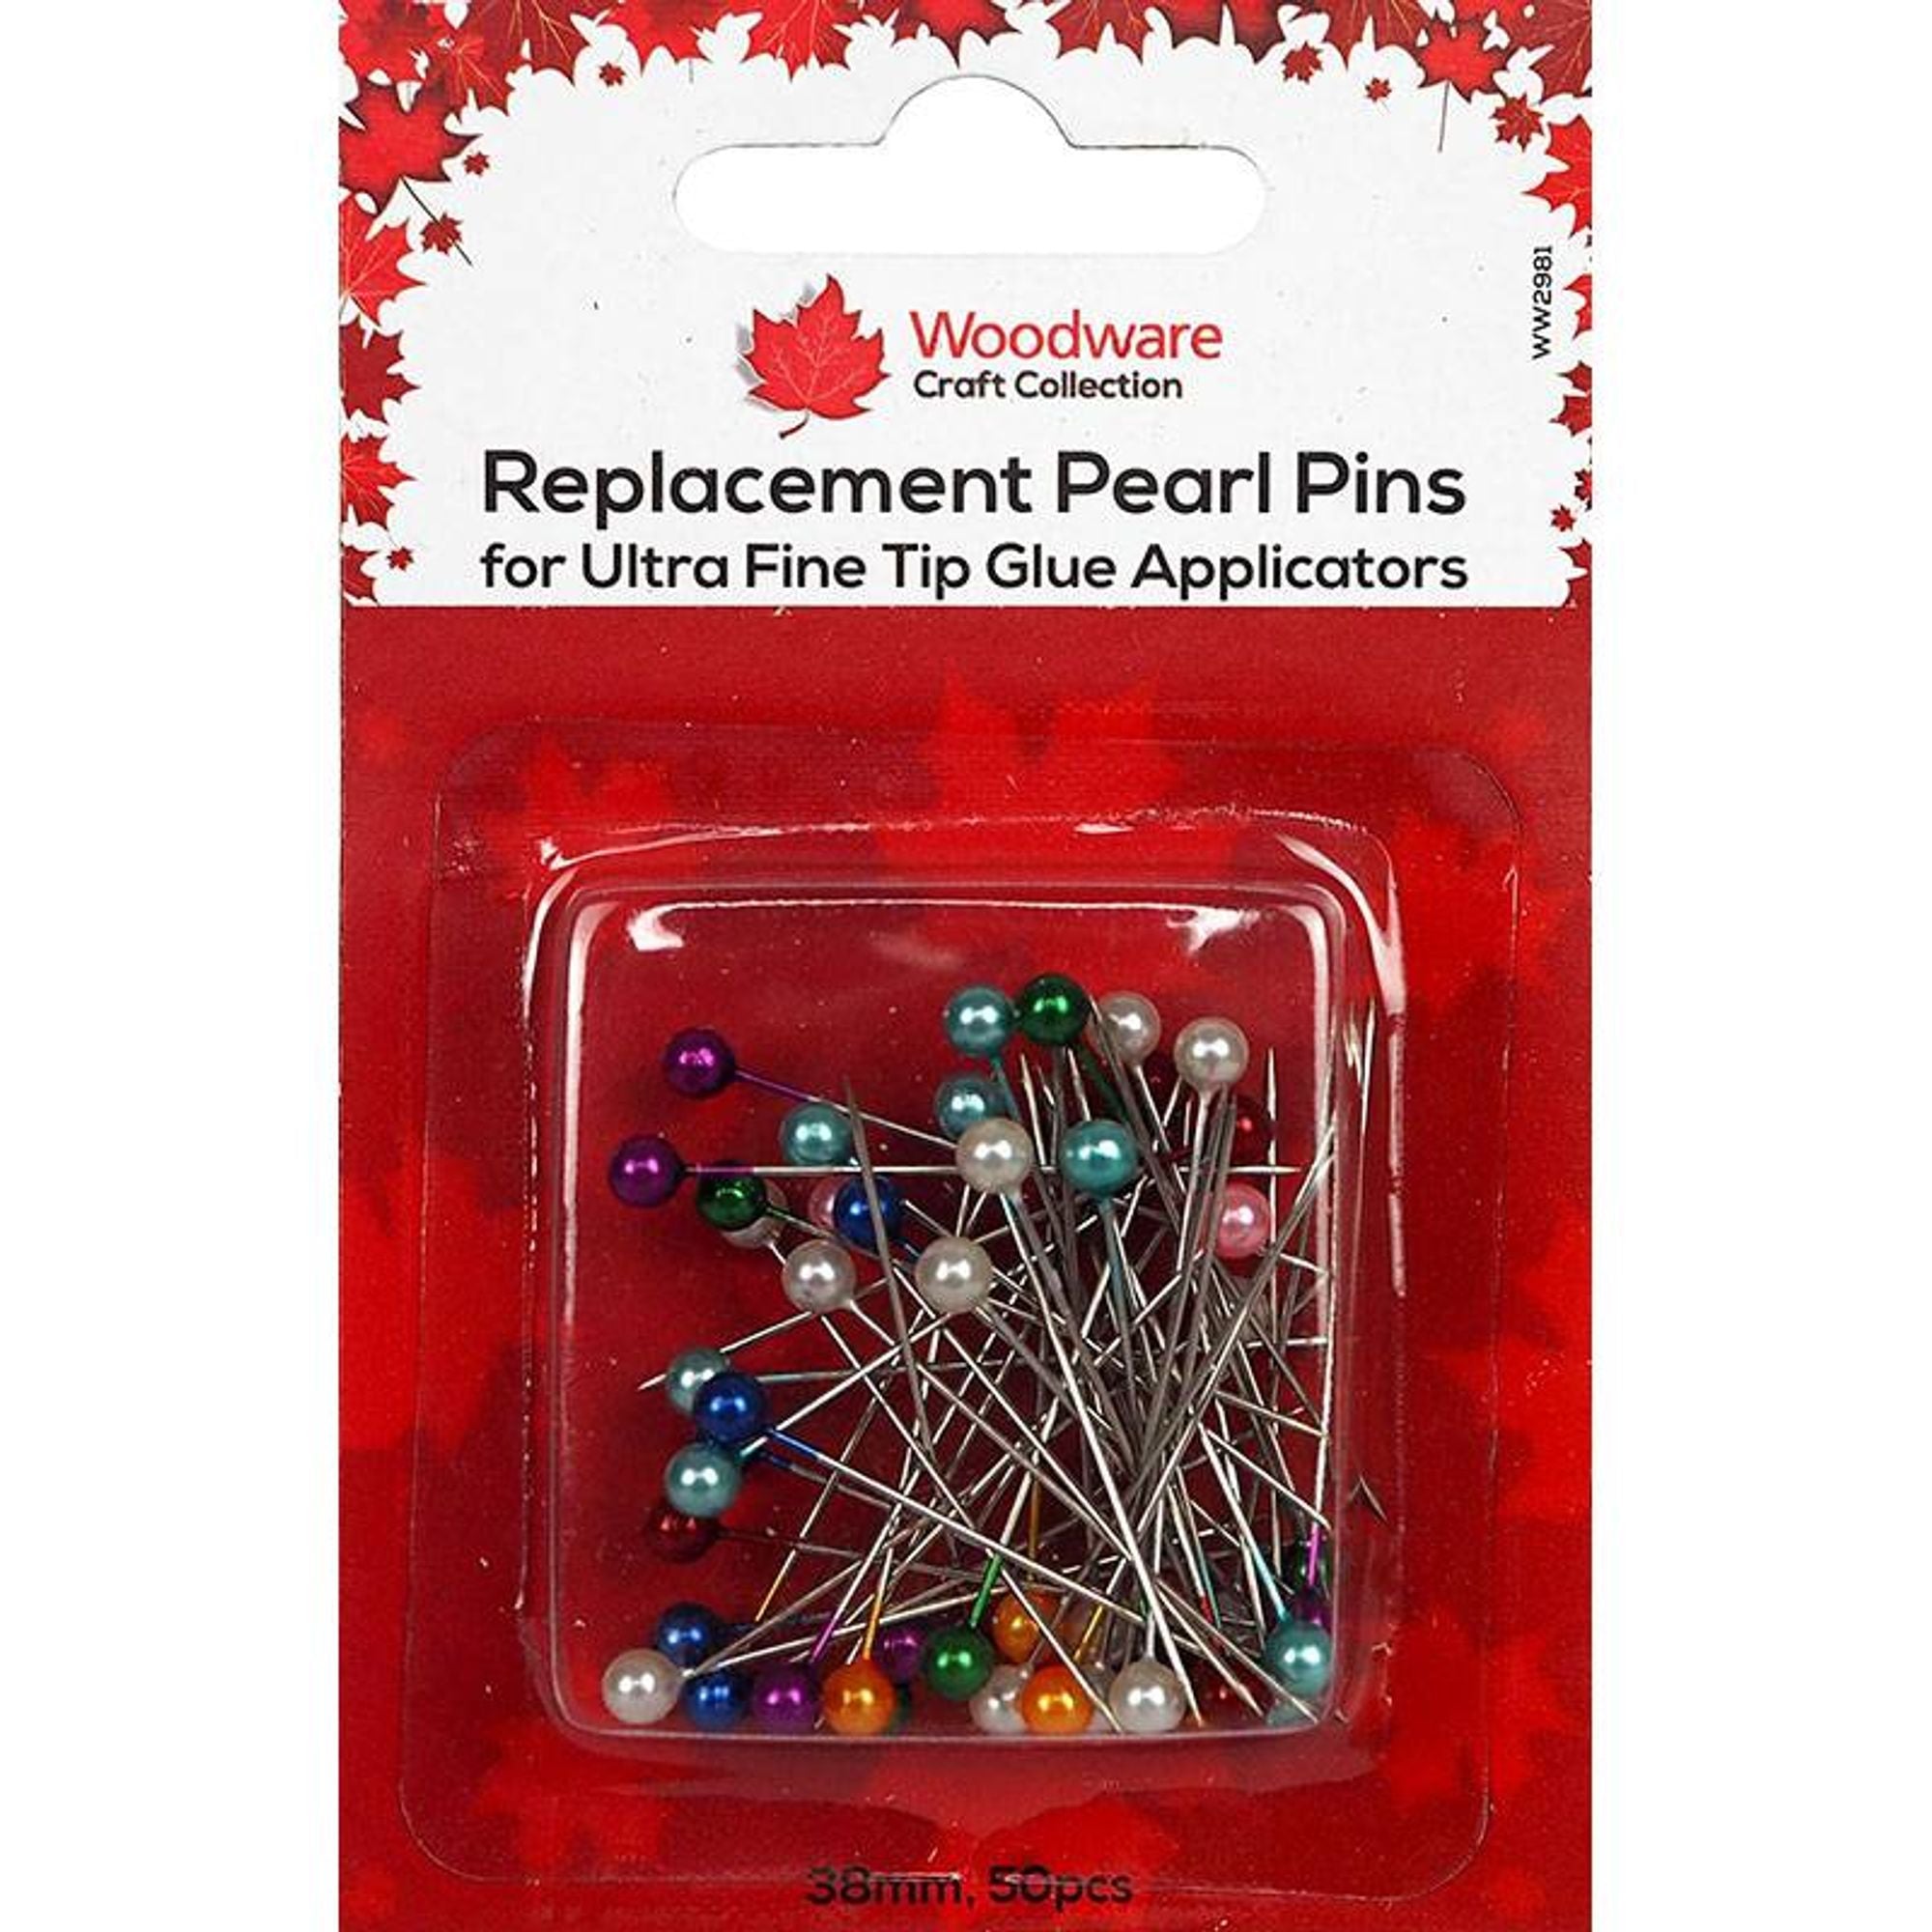 Woodware Stainless Steel Pearl Pins